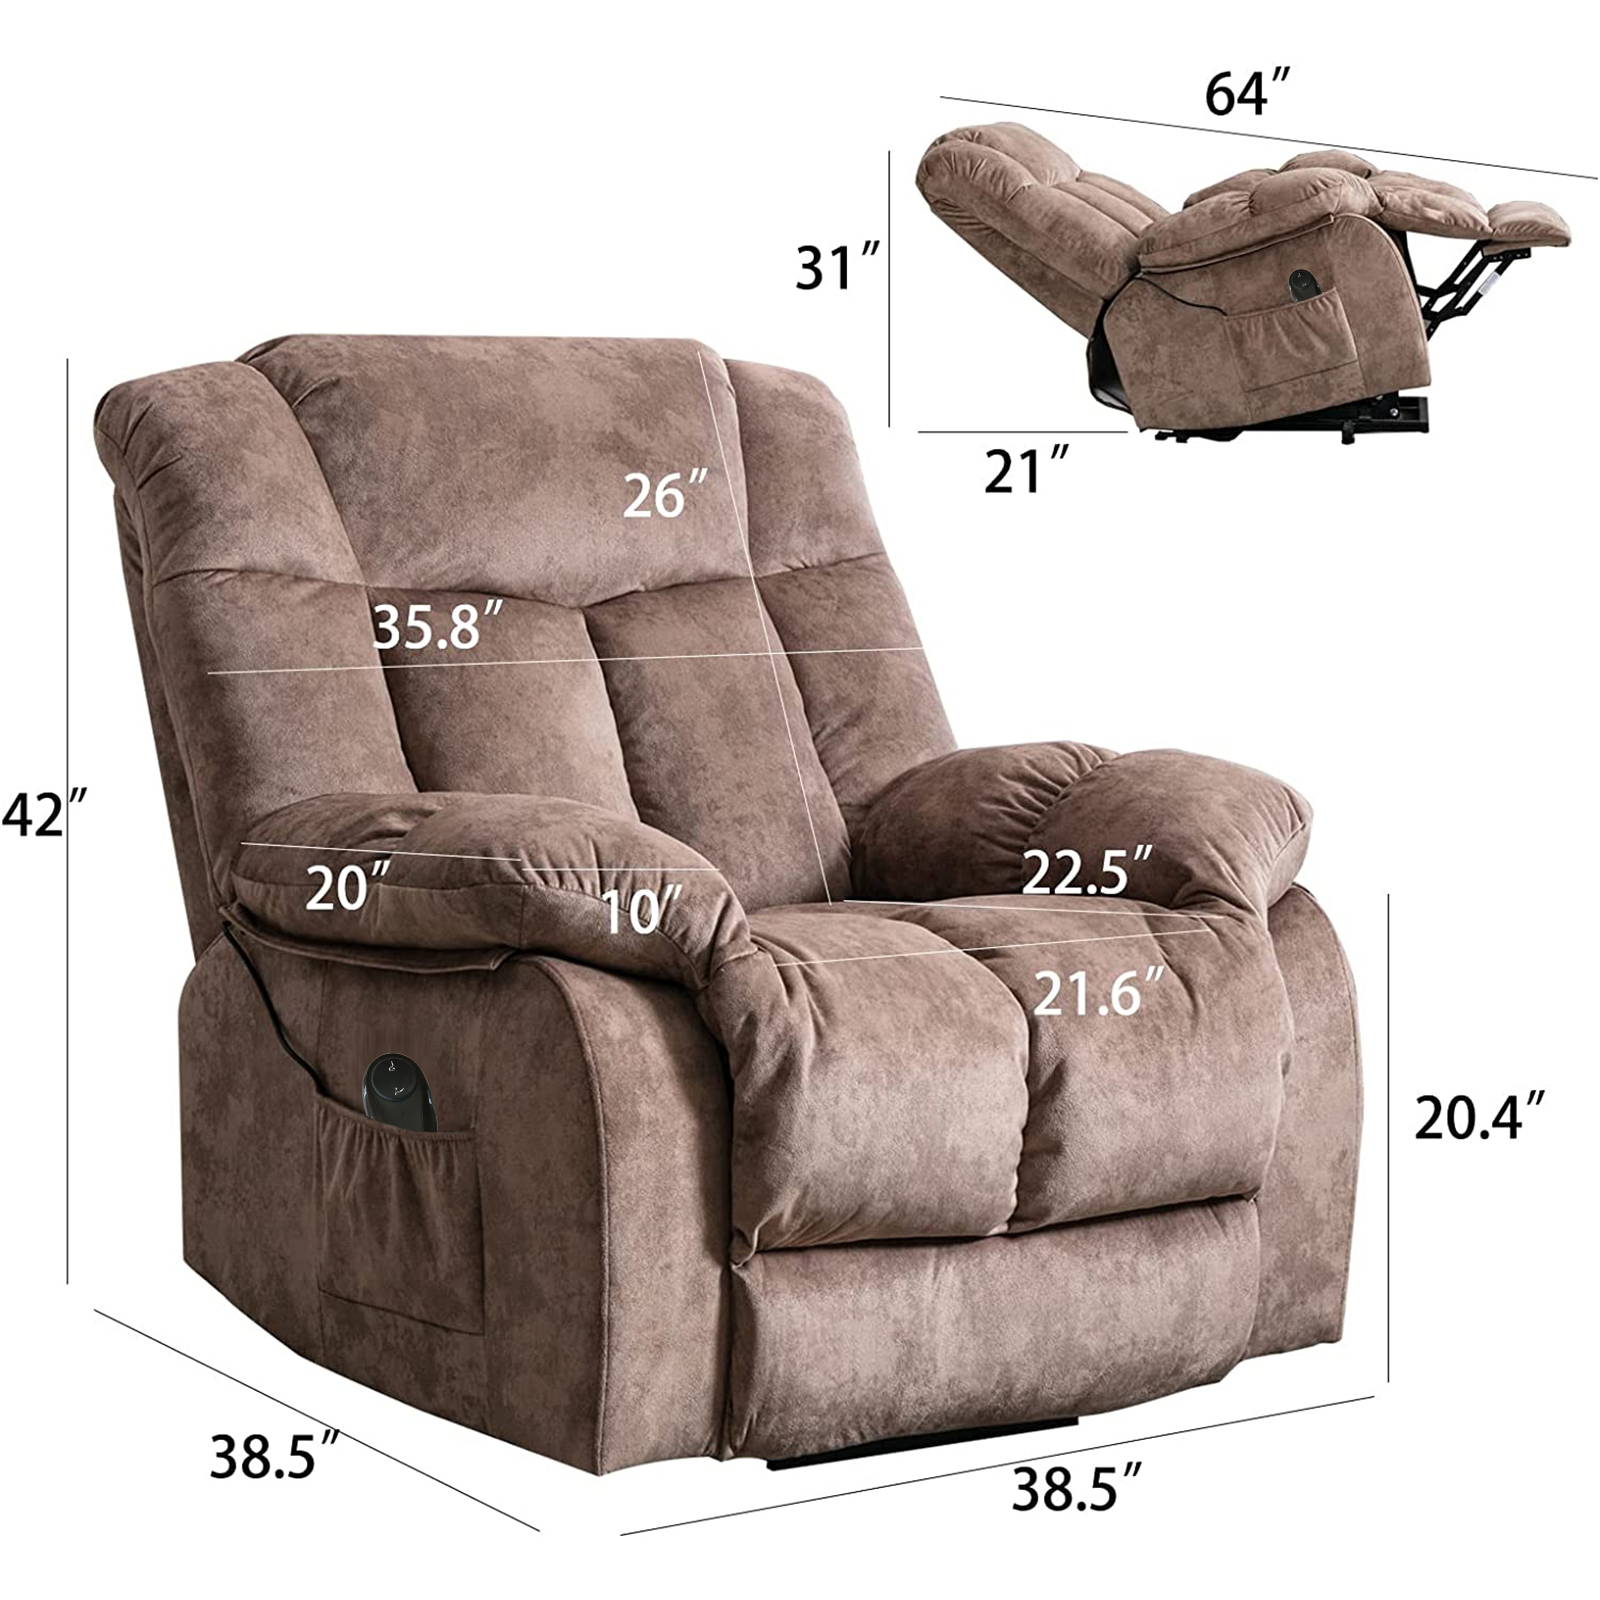 Edward Creation A comfort lift chair is a great way to make your life more pleasant and relaxing.